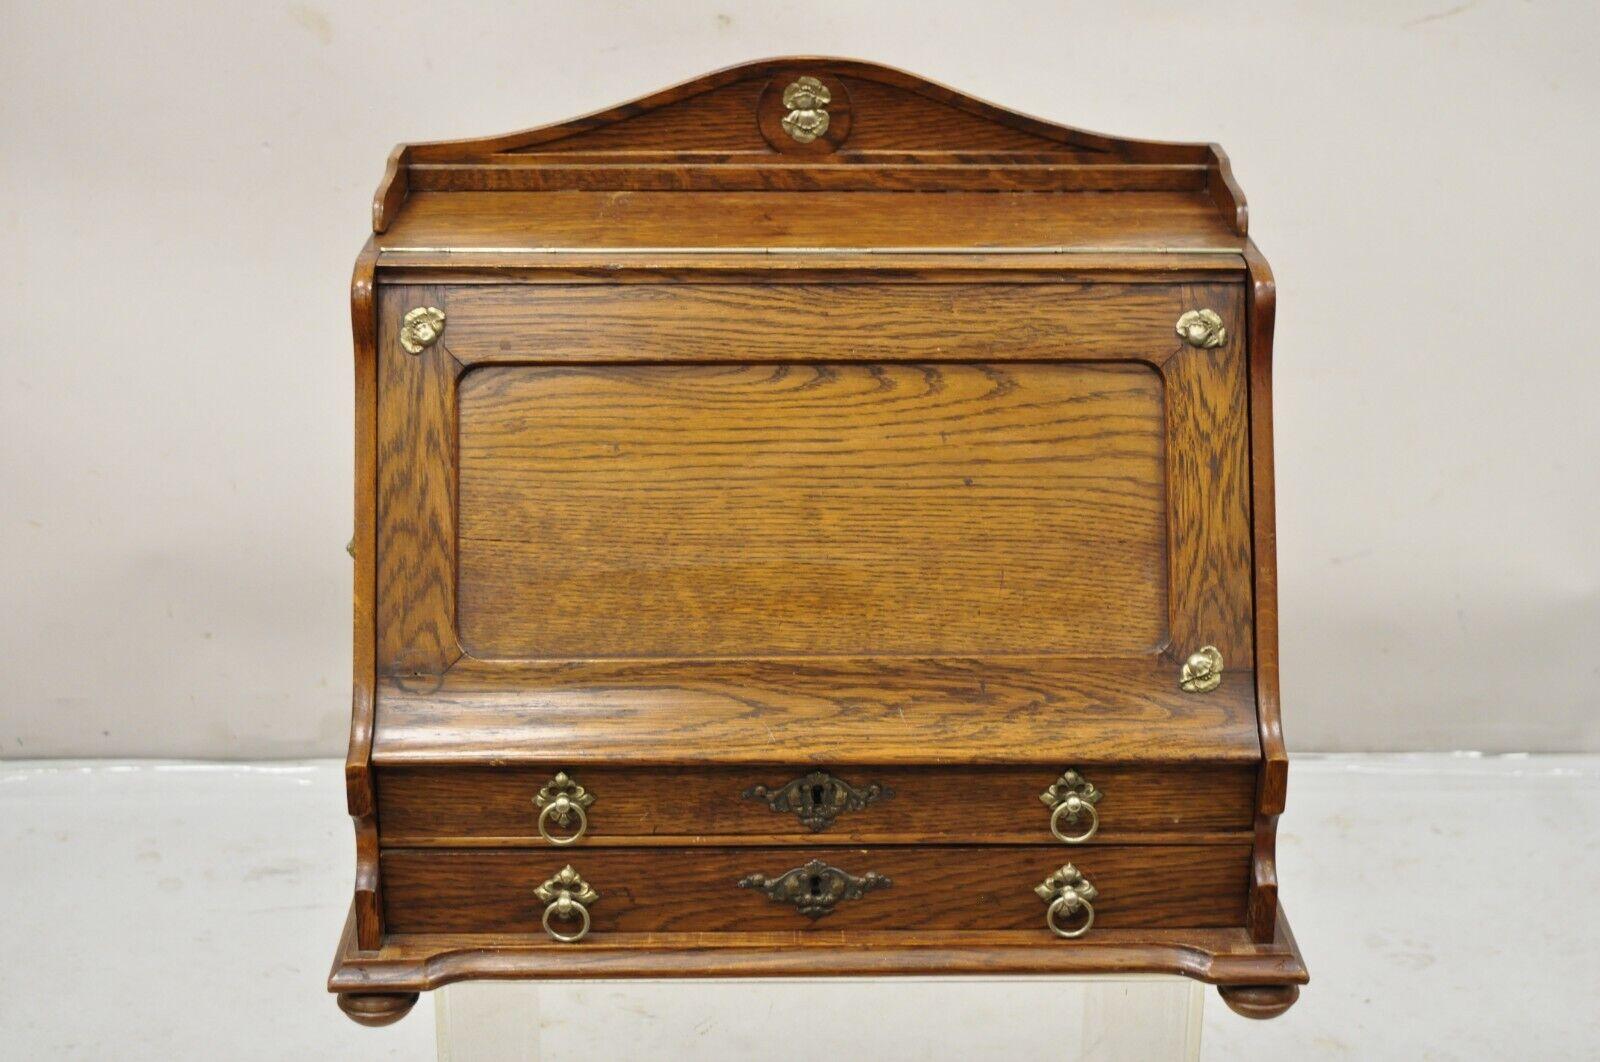 Antique English Victorian Oak Wood Desktop Lap Desk Letter Holder. Item features a lift front with fitted interior, small glass inkwell, lion head drop ring handles, raised on turn carved feet, solid wood construction, beautiful woodgrain, very nice